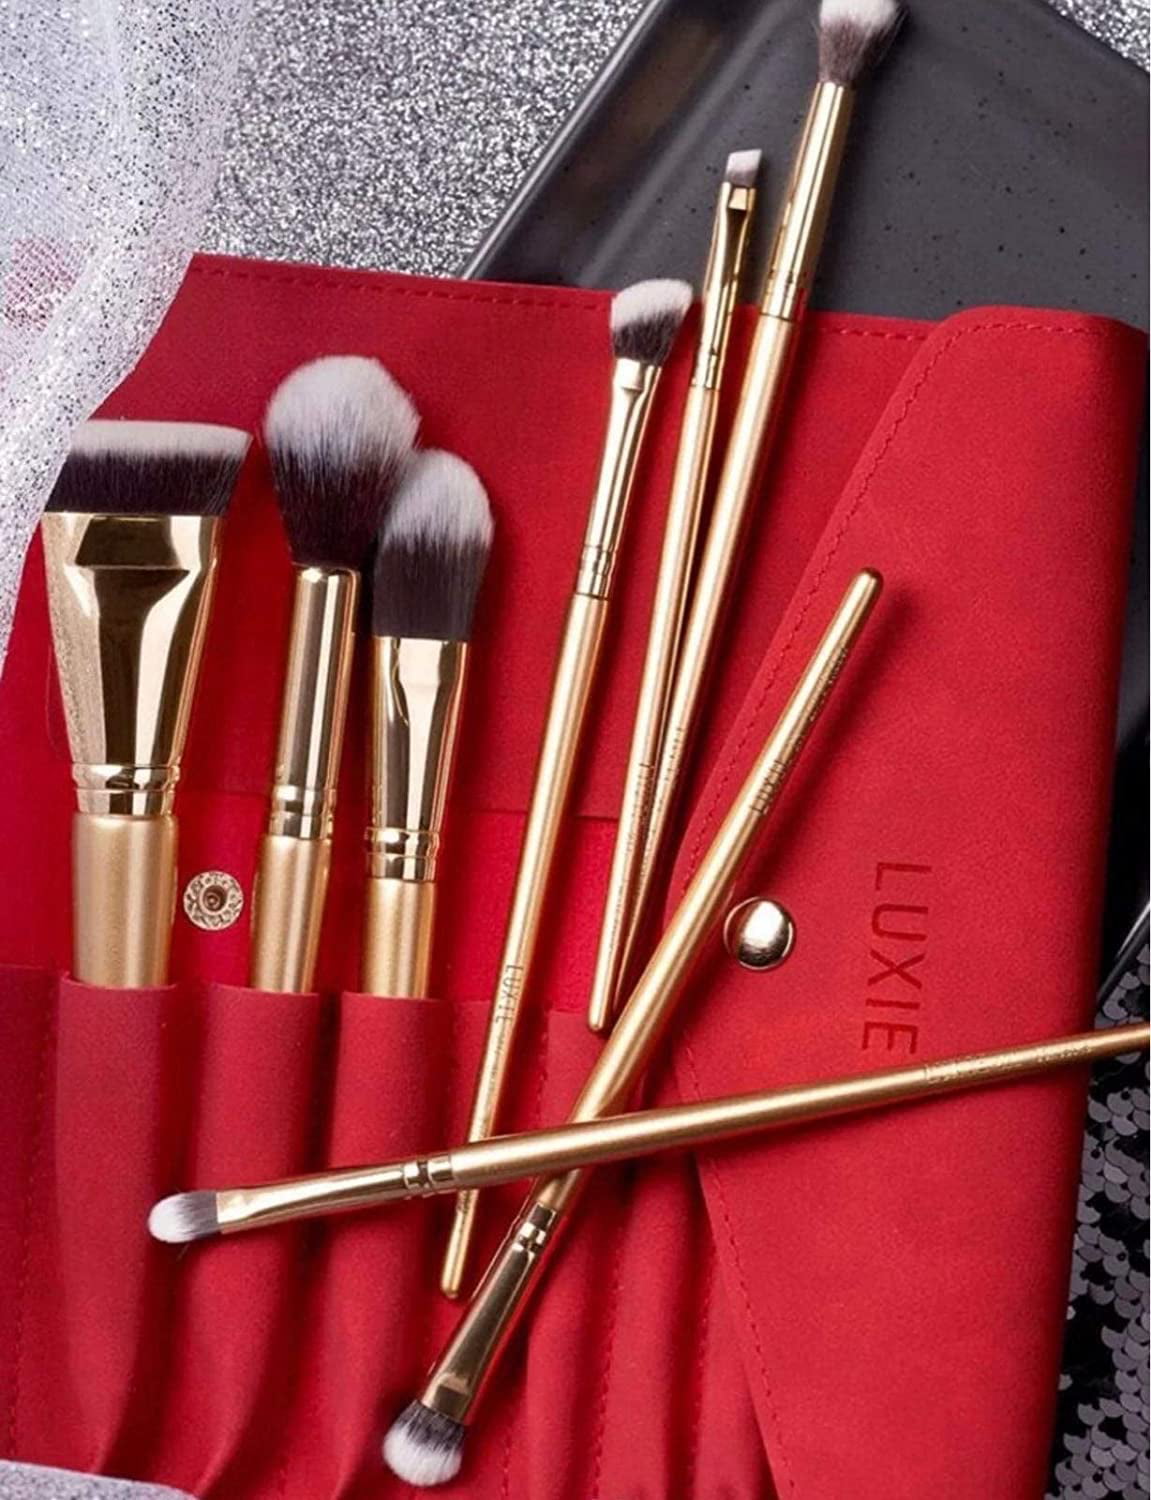 LUXIE Glitter and Gold 8 Piece Brush Set with Red Brush Case